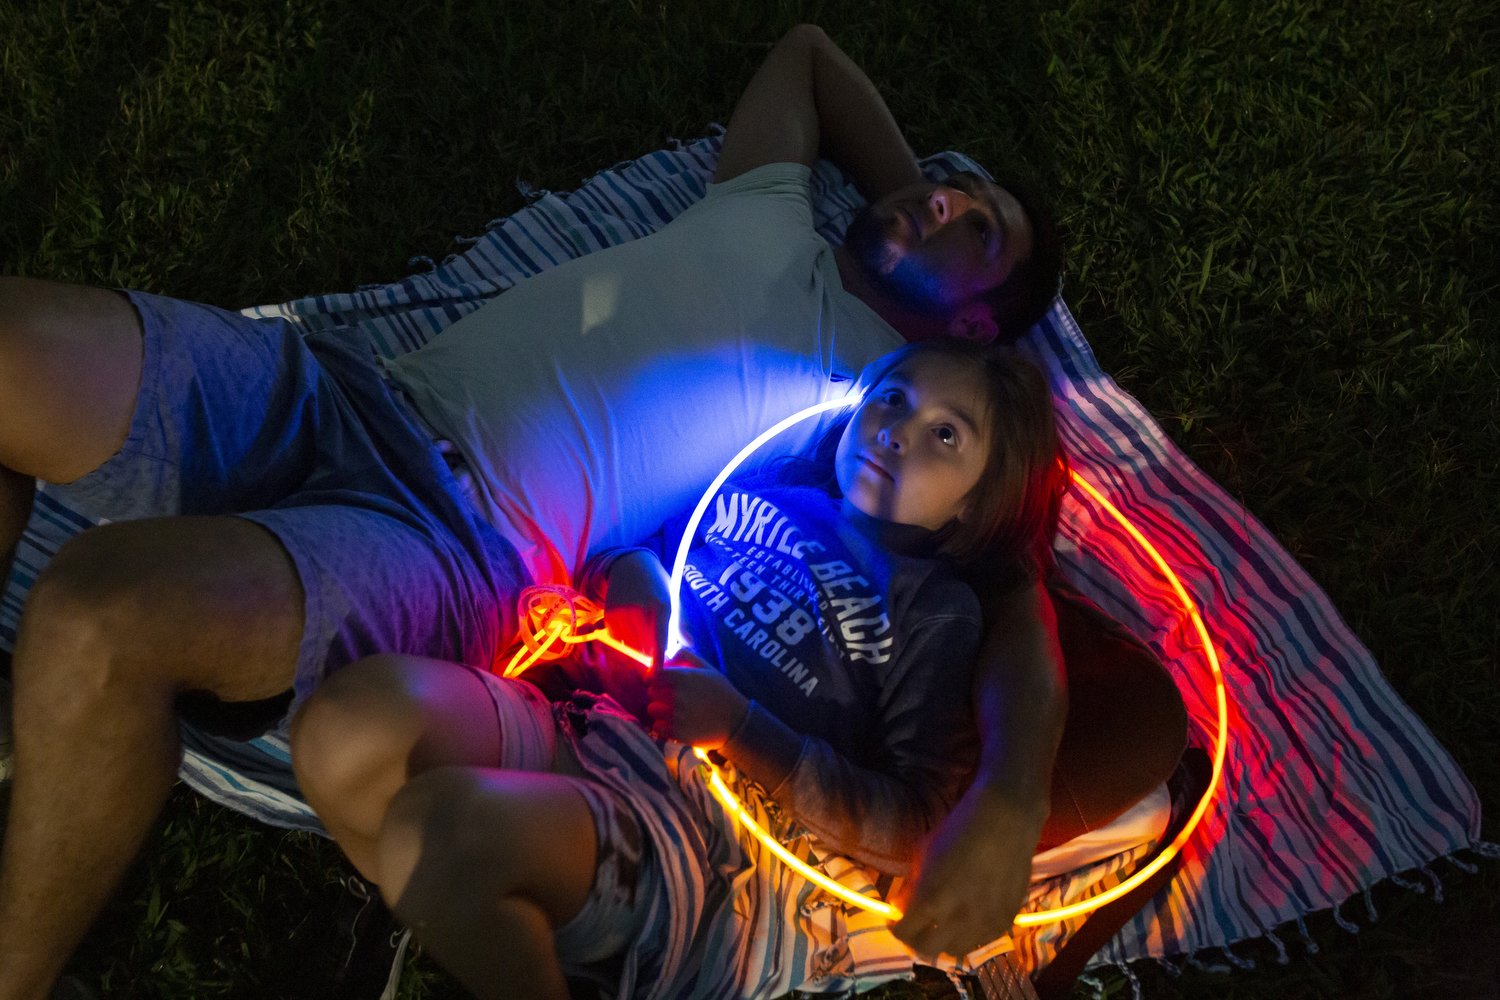  Alex Galdamez, left, and his daughter Alexa Galdamez, 9, right, look up at the stars during a skywatching event at Dorothea Dix Park in Raleigh, North Carolina. The Raleigh Astronomy Club and the Morehead Planetarium and Science Center organized the